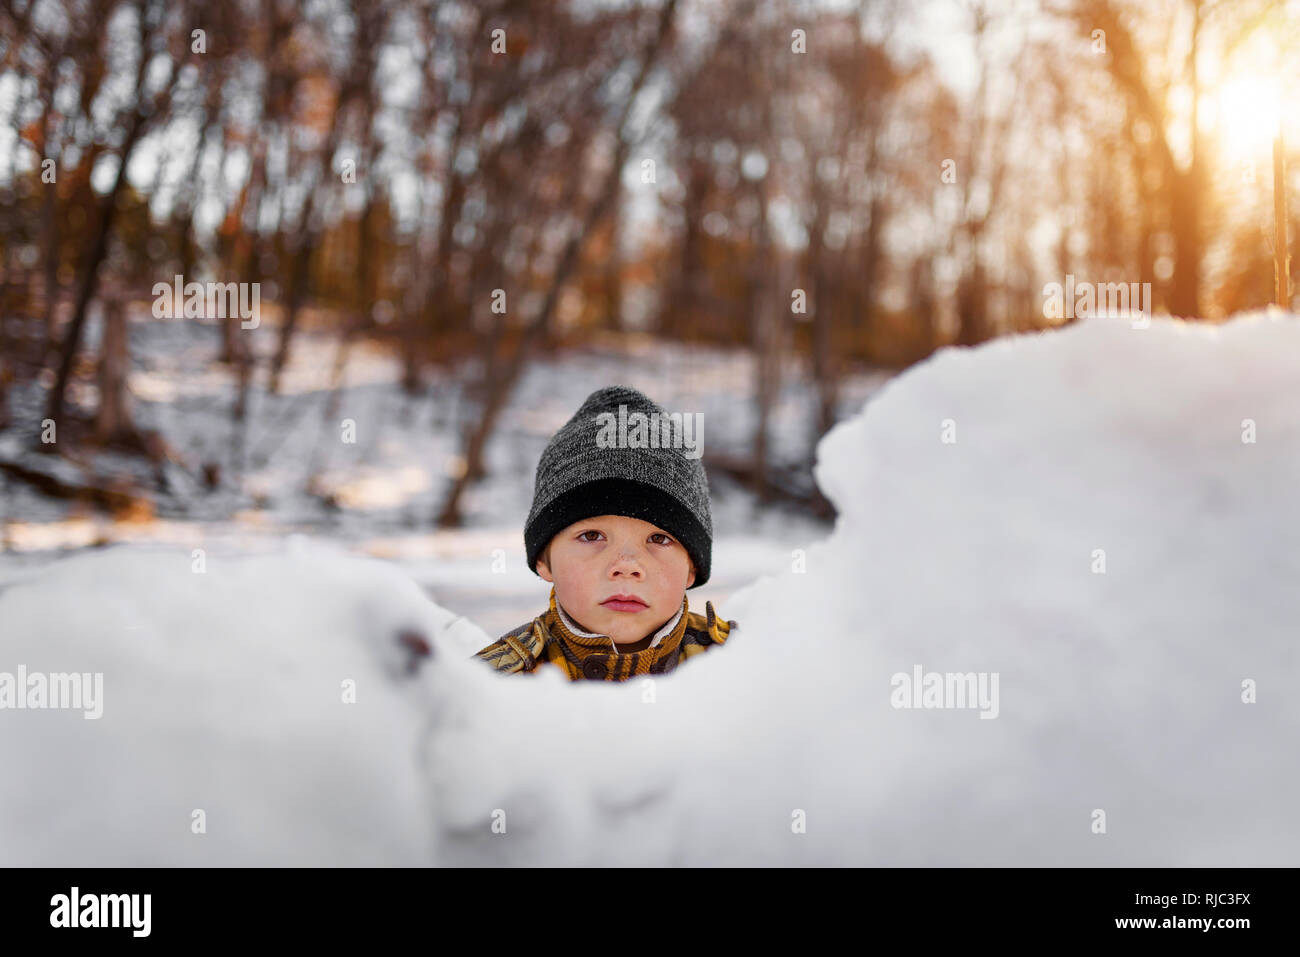 Portrait of a Boy standing in a snow fort, United States Banque D'Images